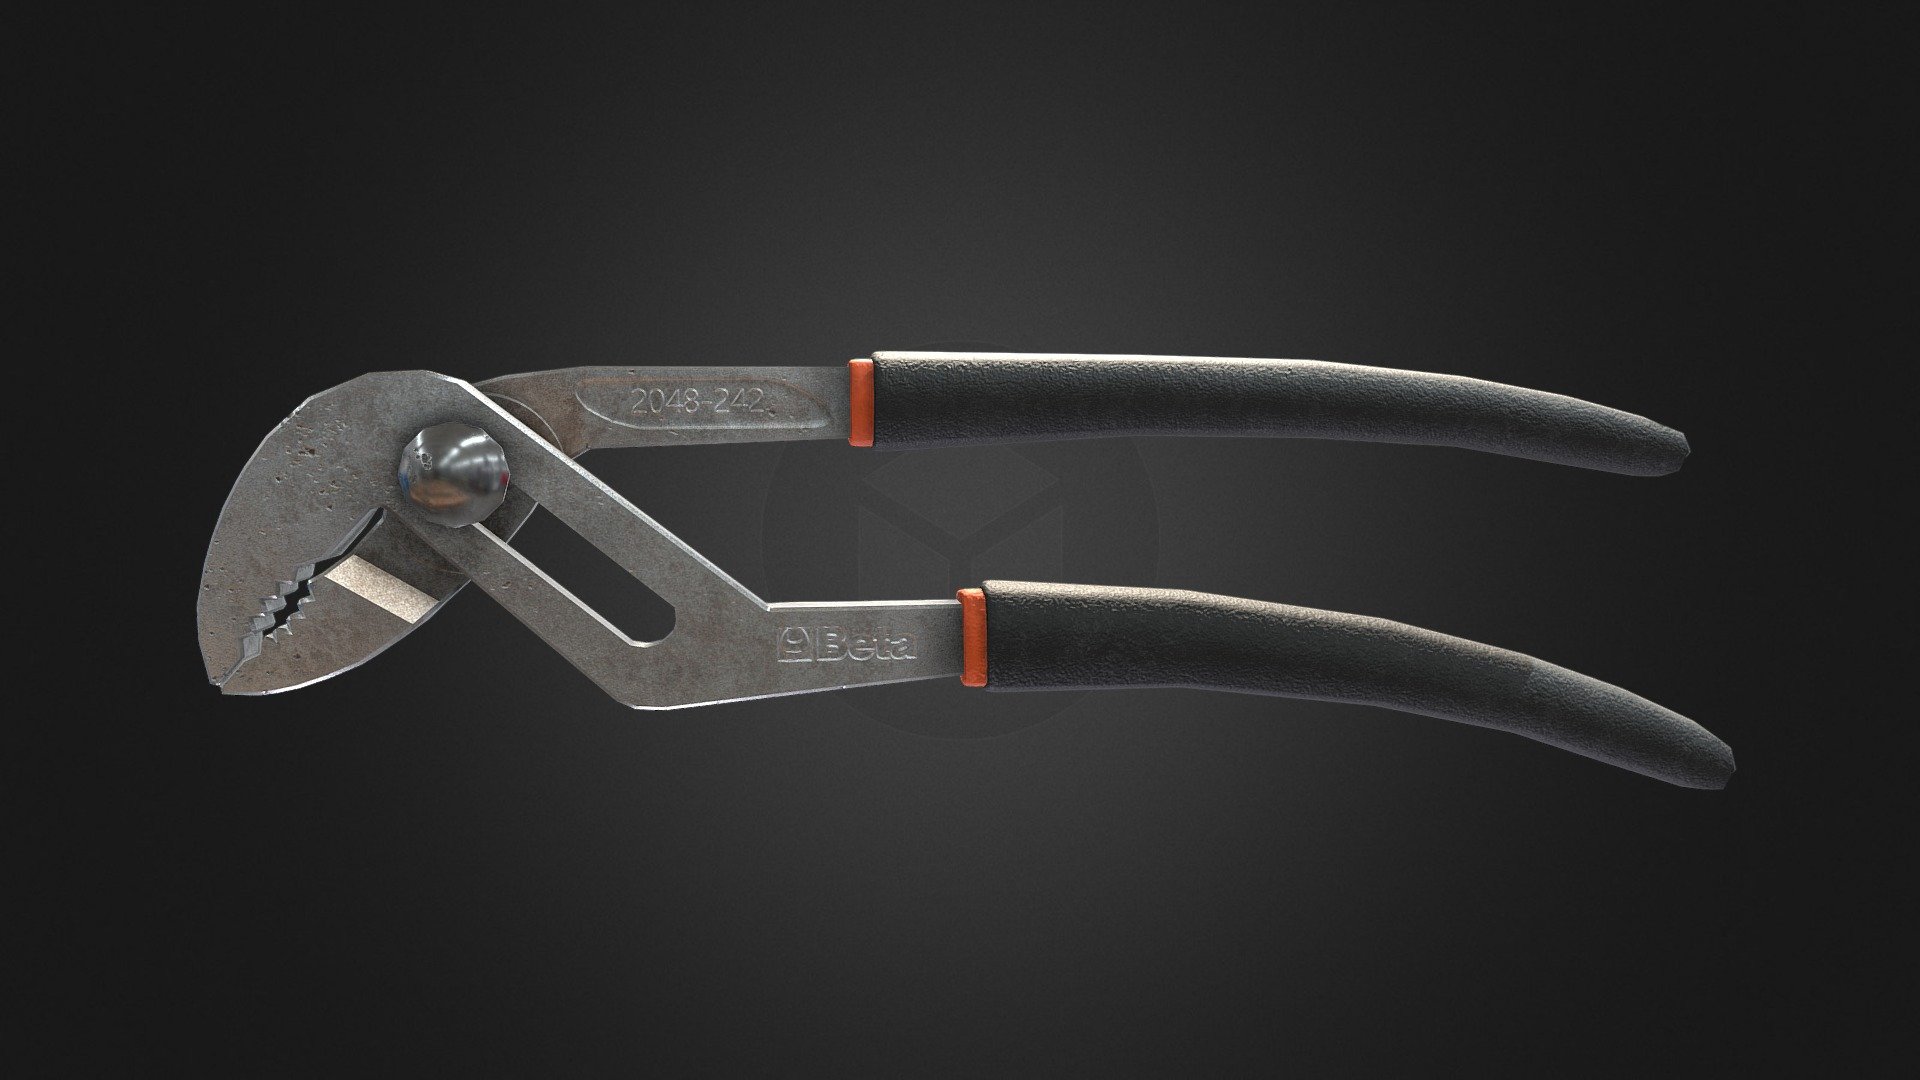 Some pliers suitable for a VR application in Unity. Made with Maya and Substance Painter 3d model